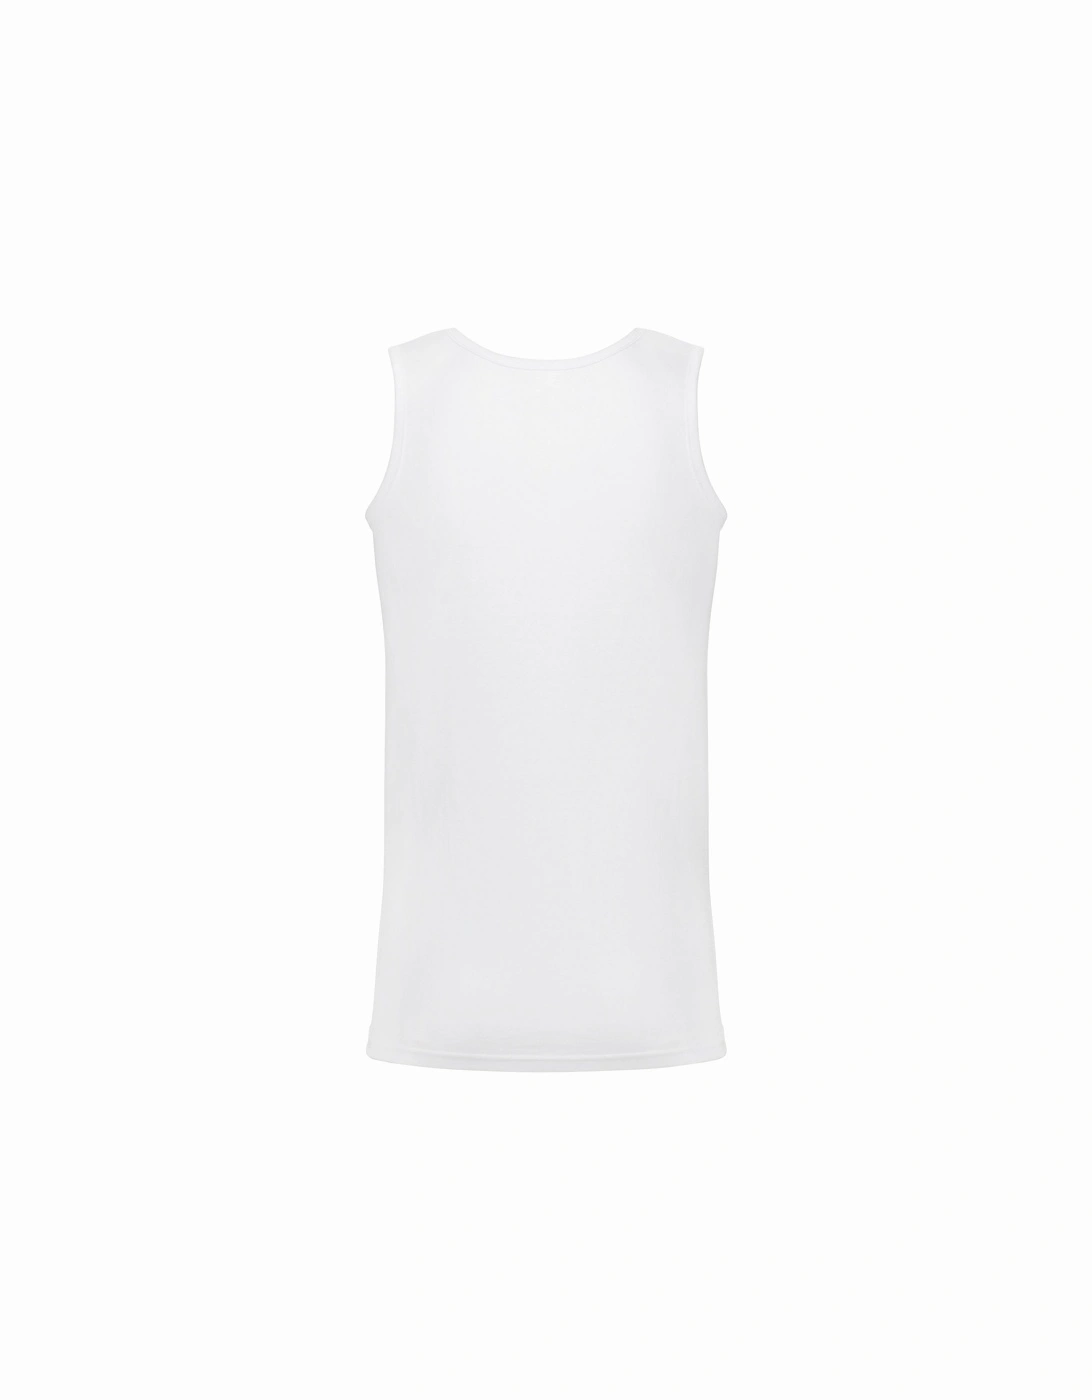 Mens Valueweight Athletic Vest Top